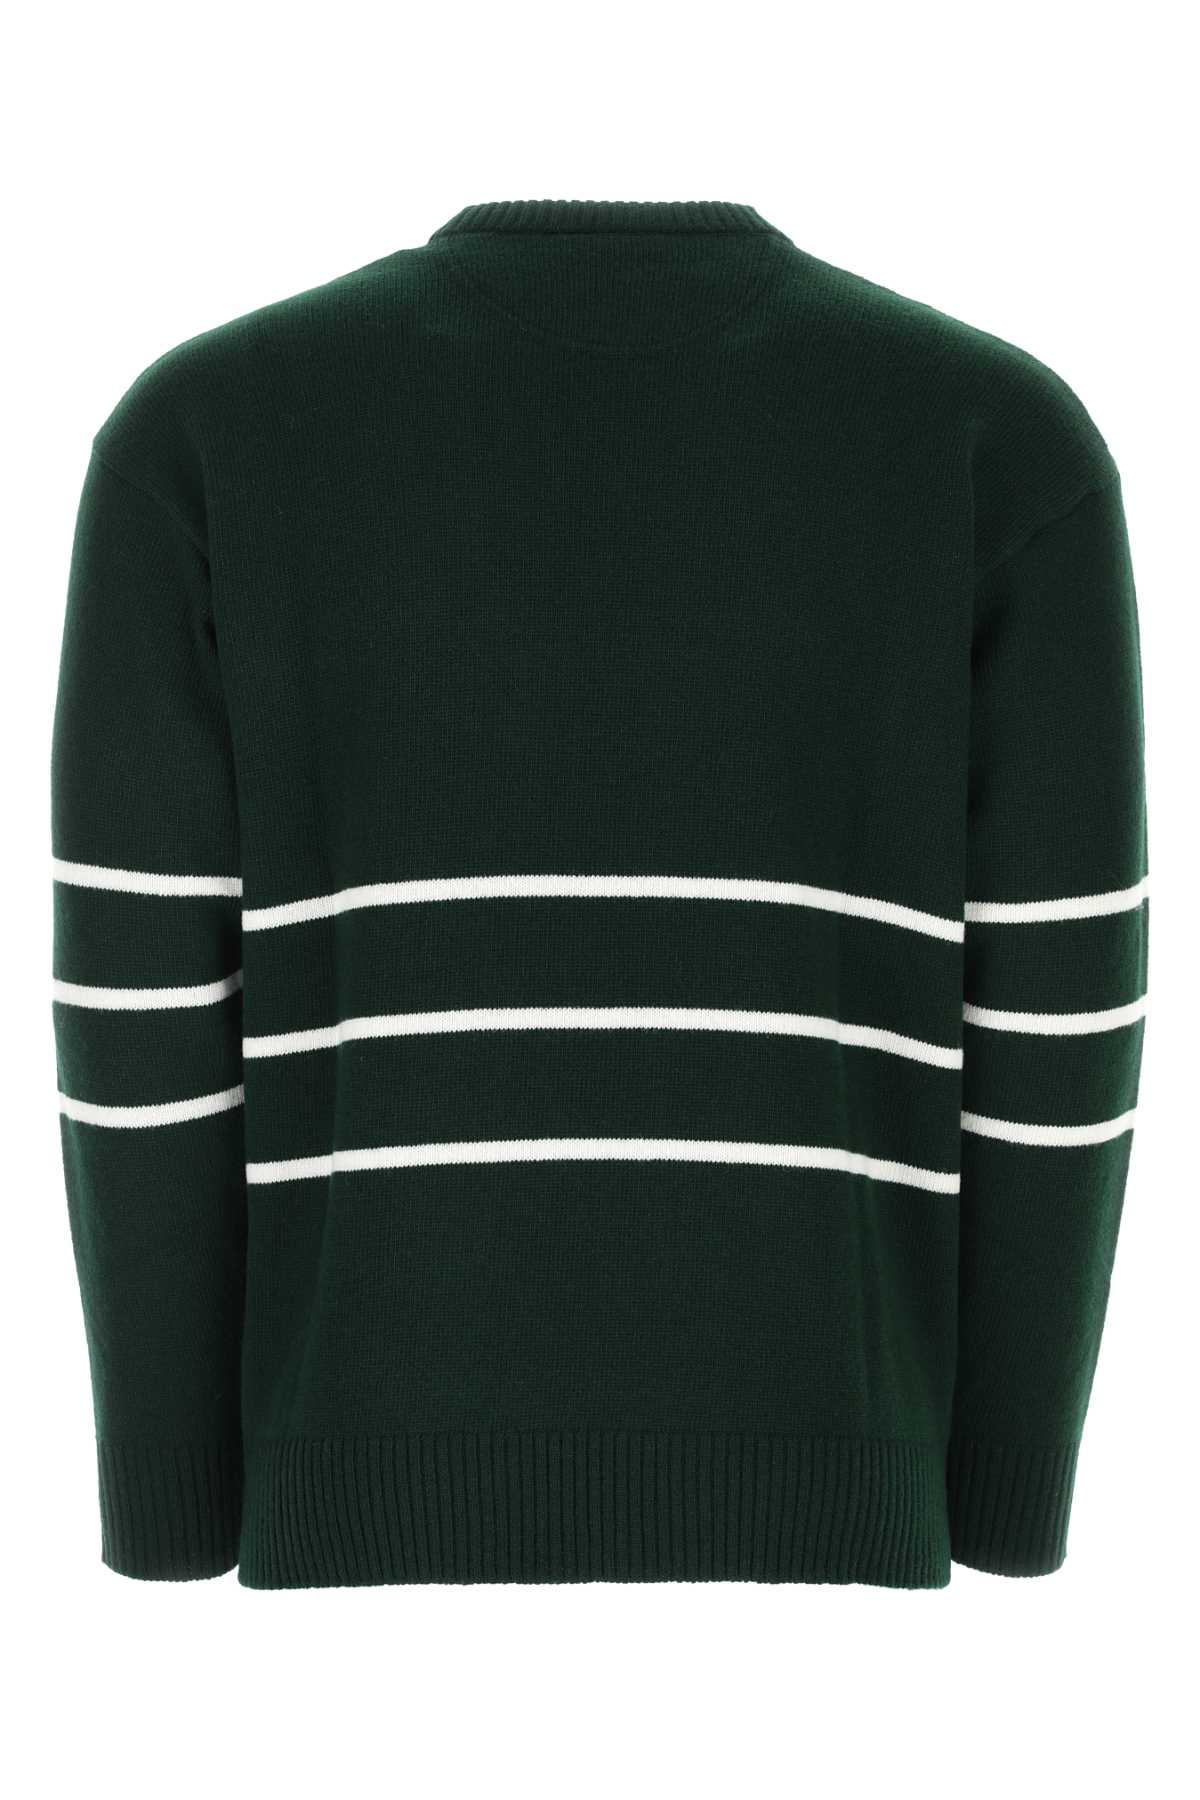 Valentino Bottle Green Wool Sweater In 0na